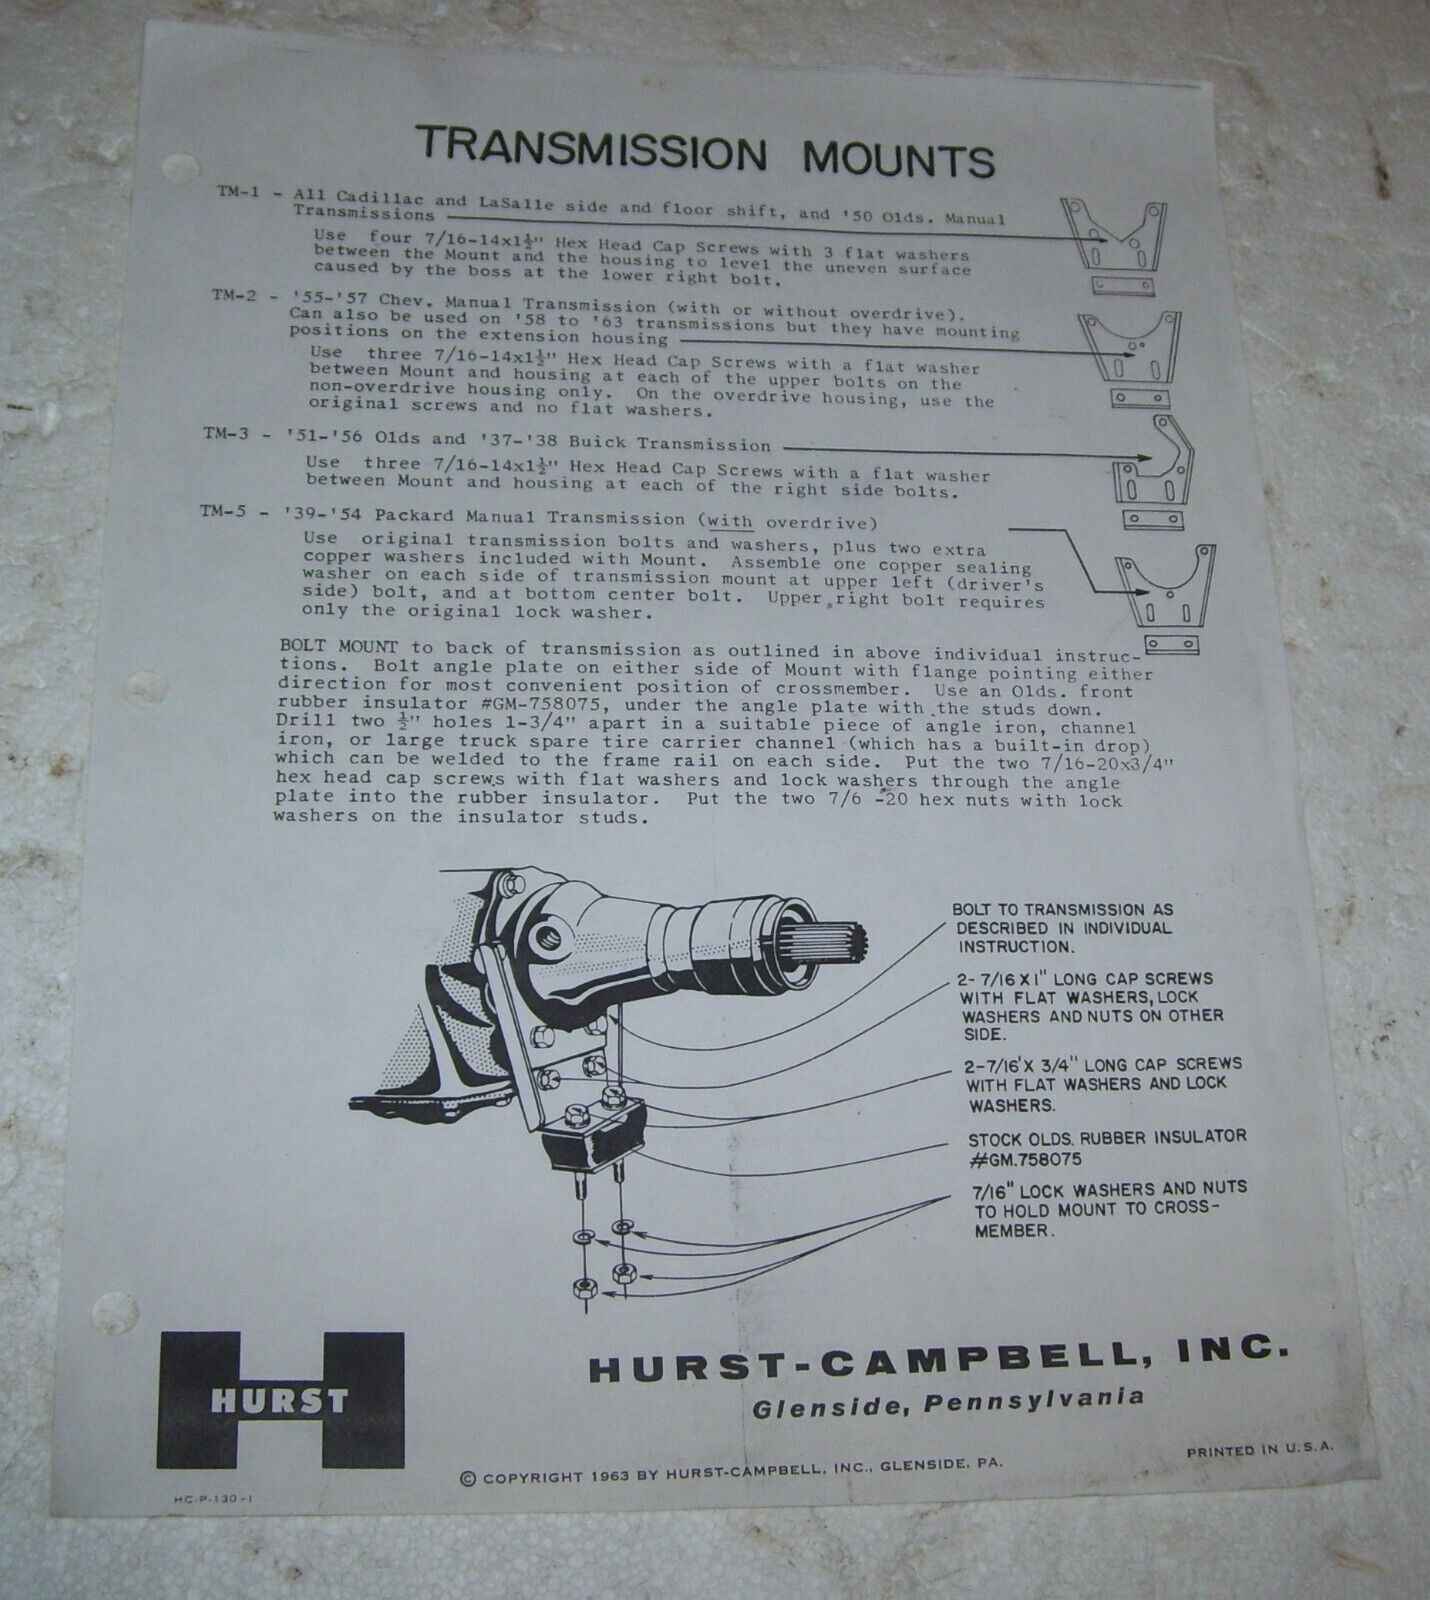 HURST TRANS MOUNT INFO- CAD-LASALLE- PACKARD- 51-56 OLDS- 55-57 CHEVY -50 OLDS